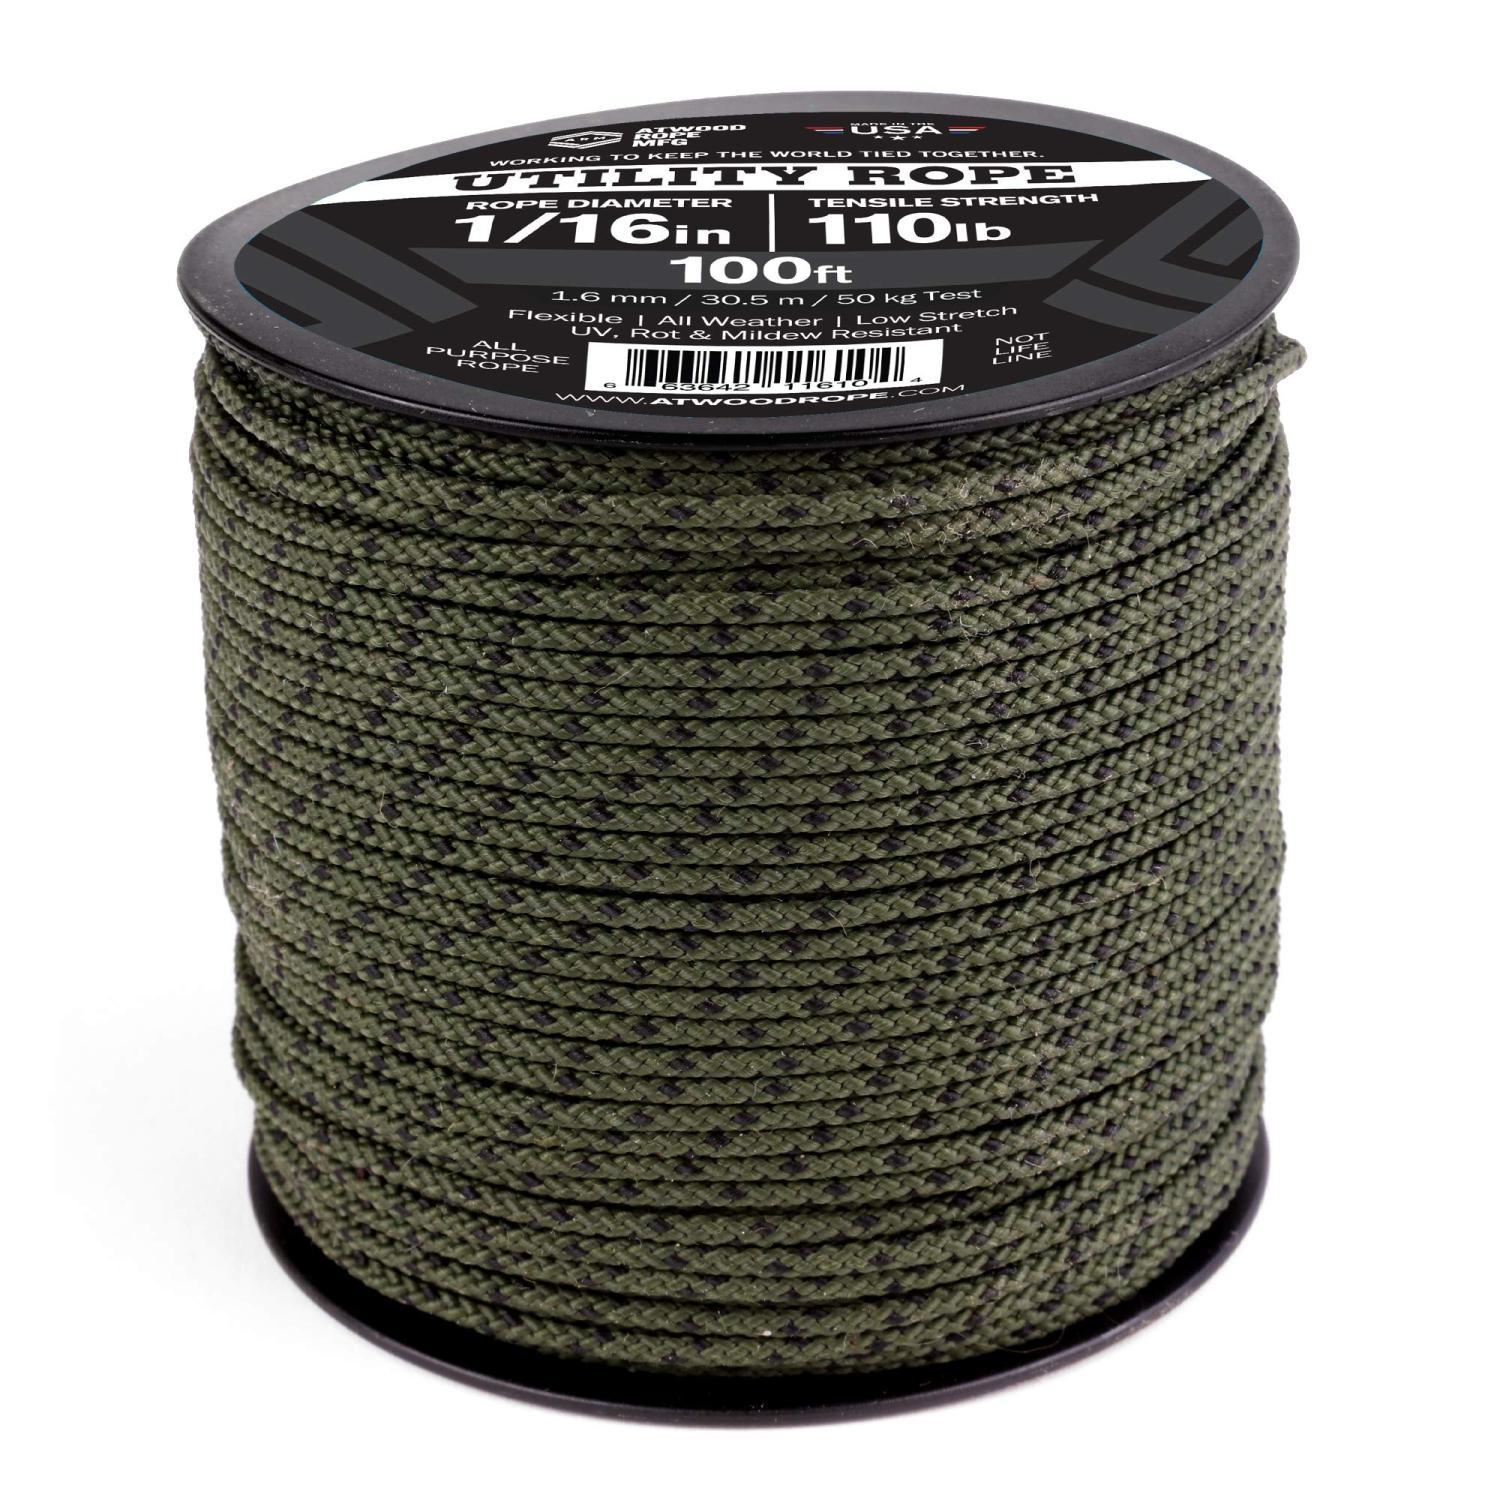 Atwood Rope MFG 1/16 Utility Cord 1.6mm x (Spool Length) Reusable